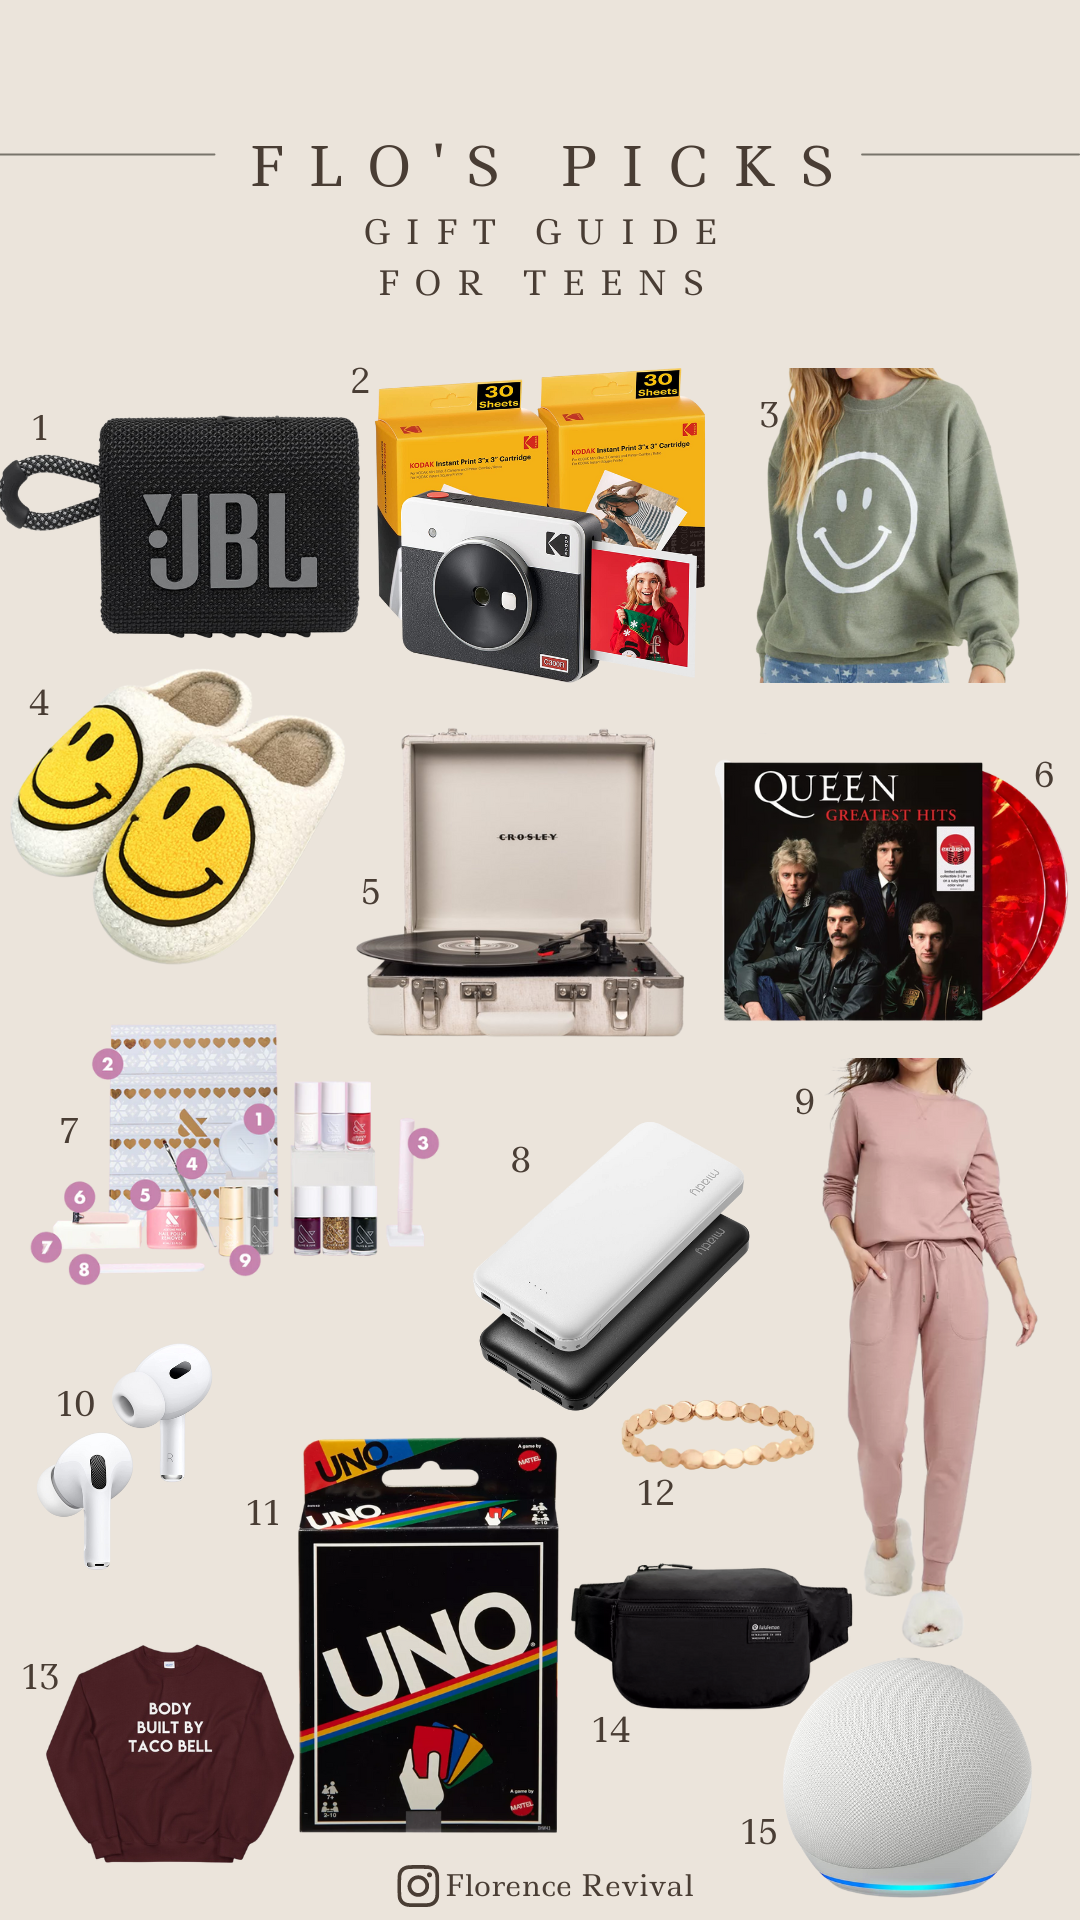 Gift guide for teens - images of all gifts suggested.